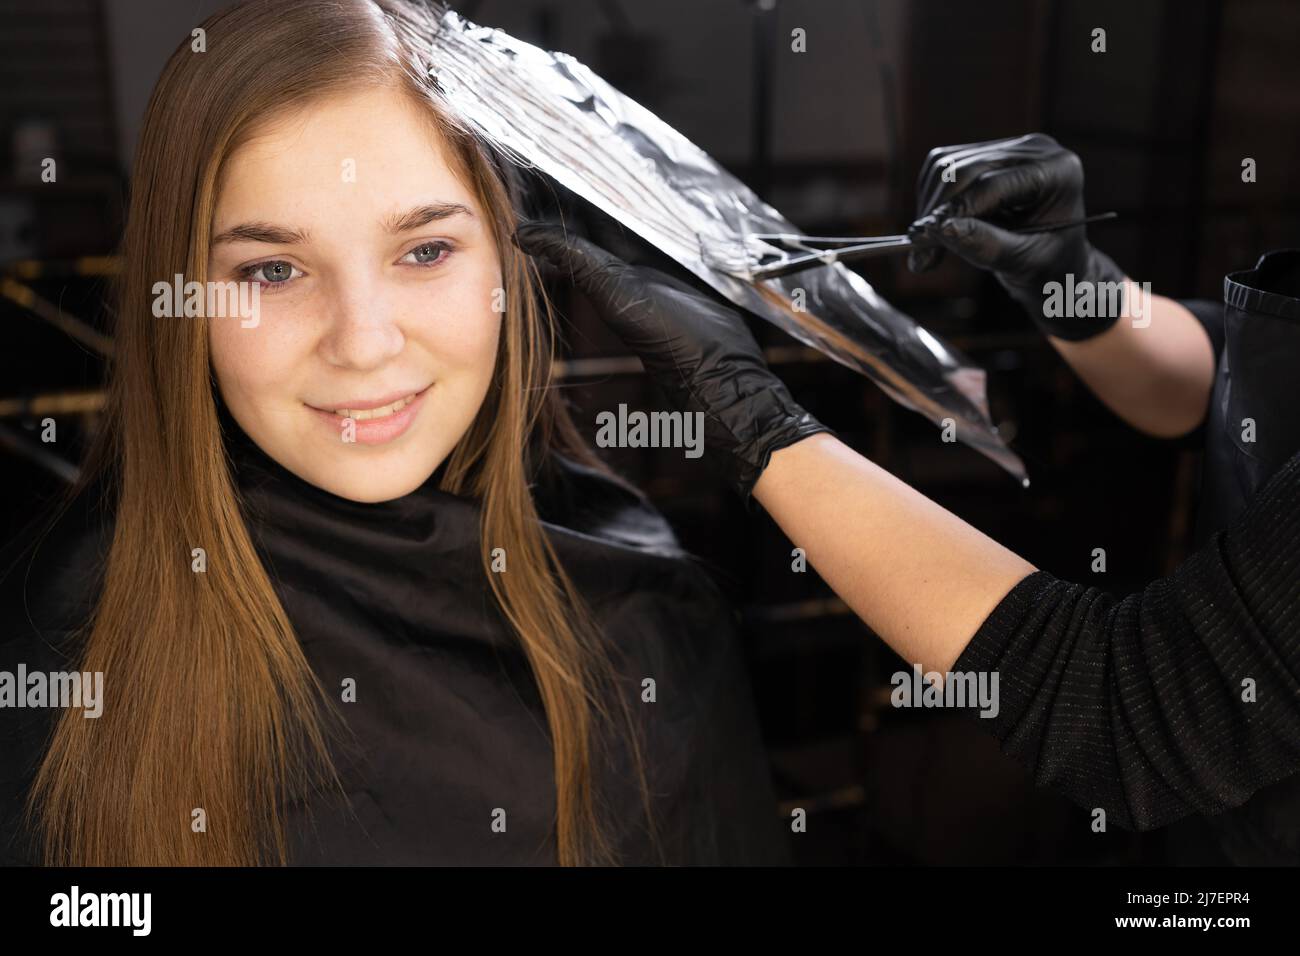 Foil on models hair. Bleaching or dyeing process. Beauty salon, fashionable  hair coloring. Copy space Stock Photo